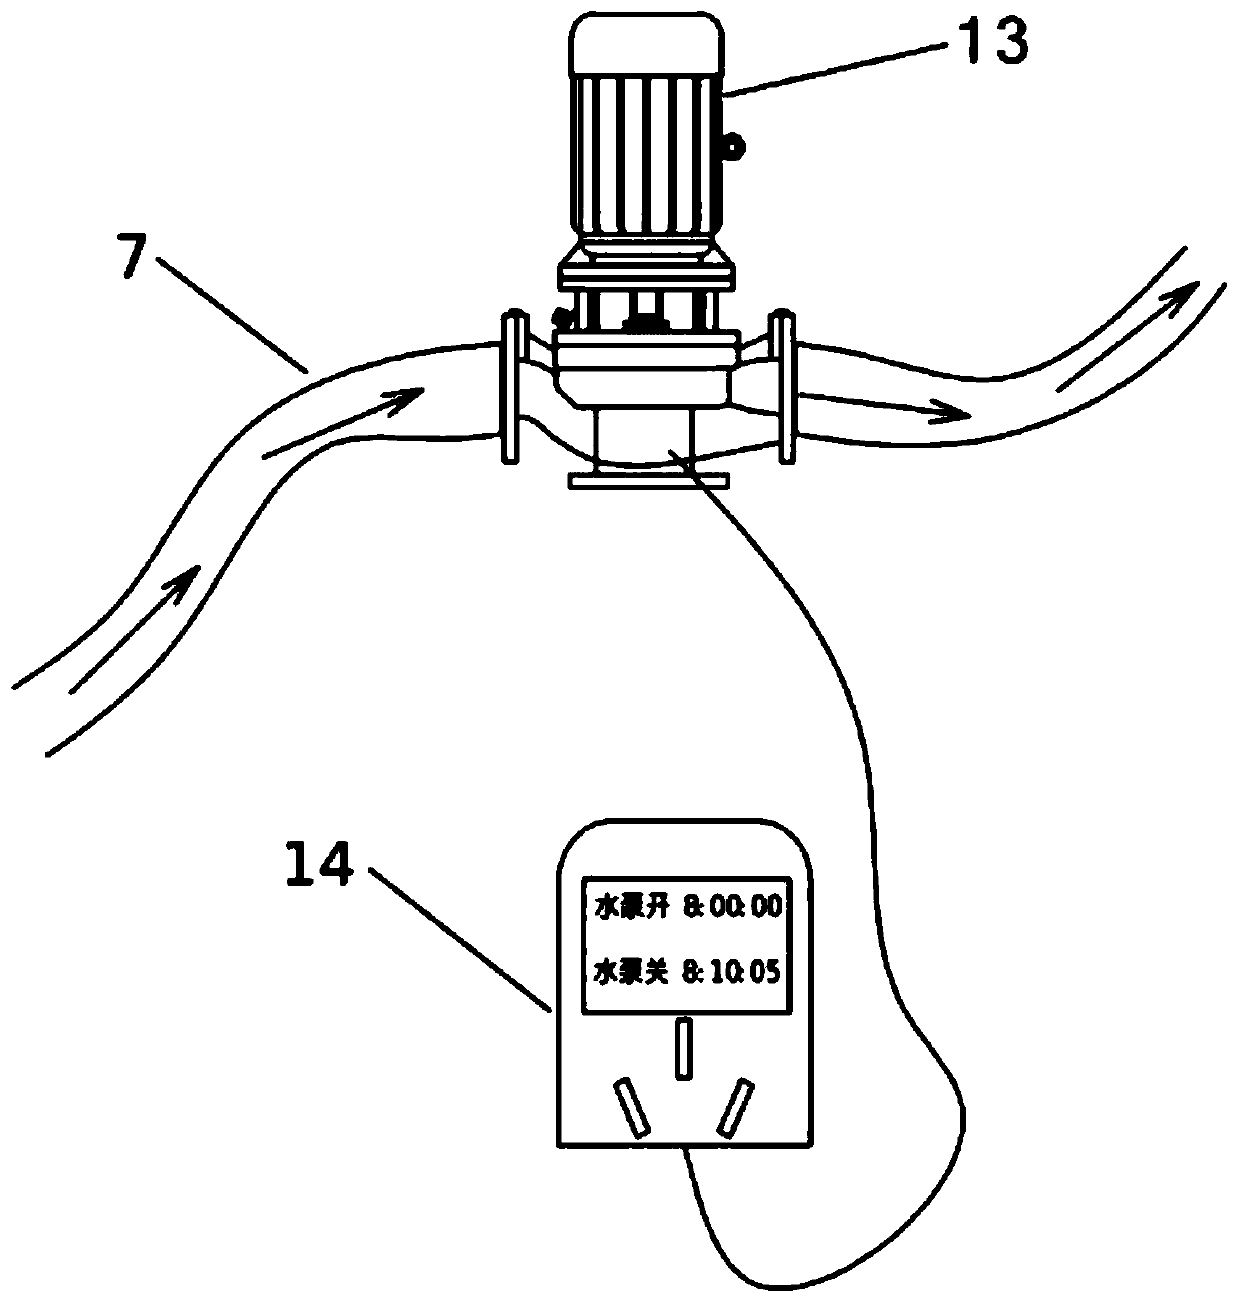 Water and fertilizer recycling device system